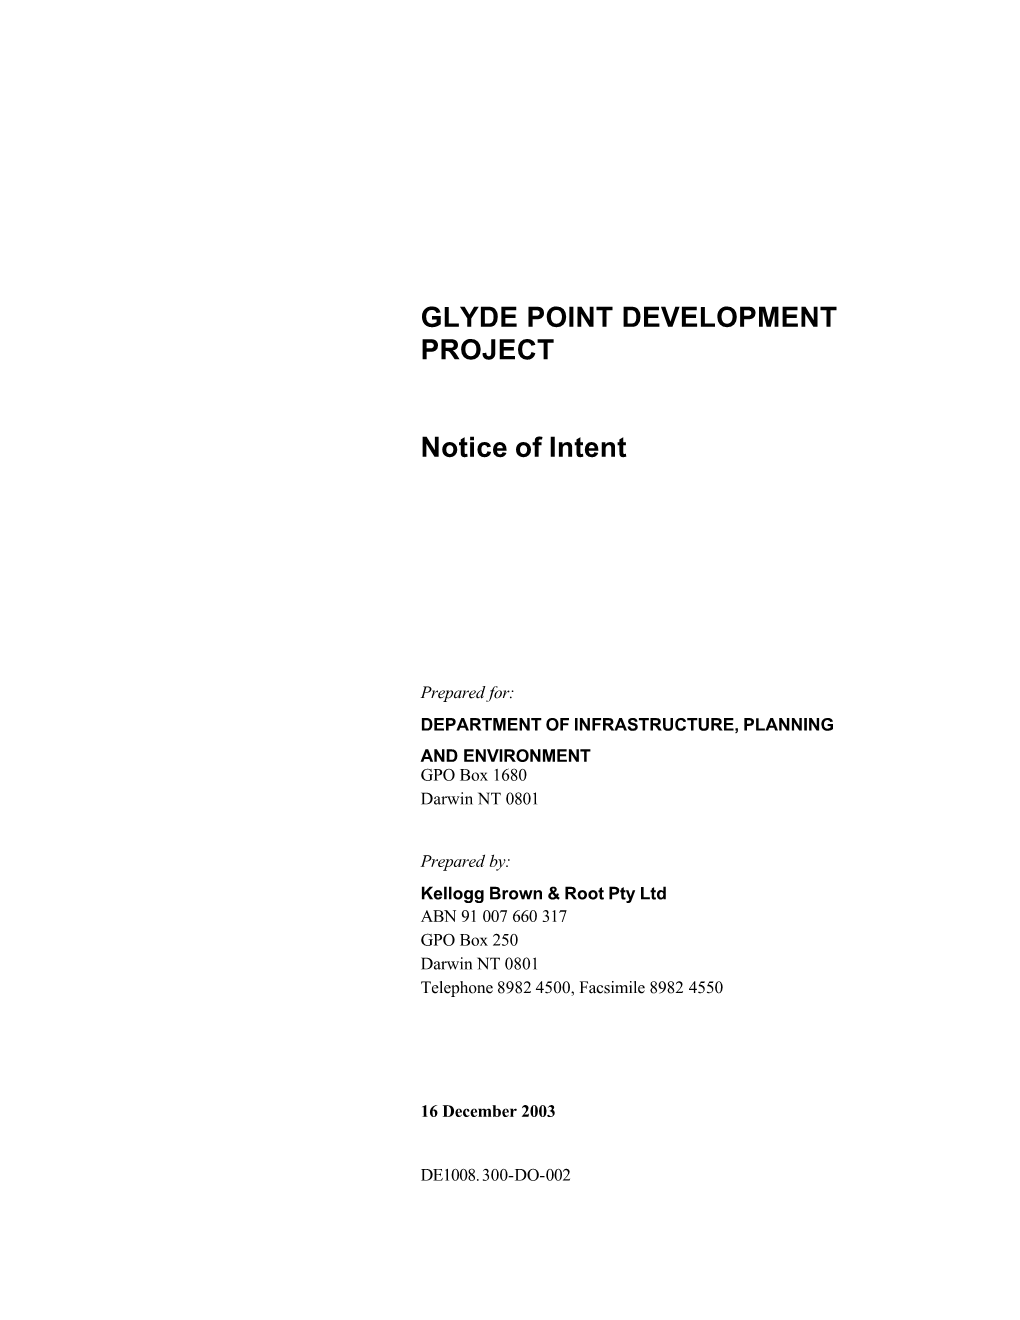 GLYDE POINT DEVELOPMENT PROJECT Notice of Intent